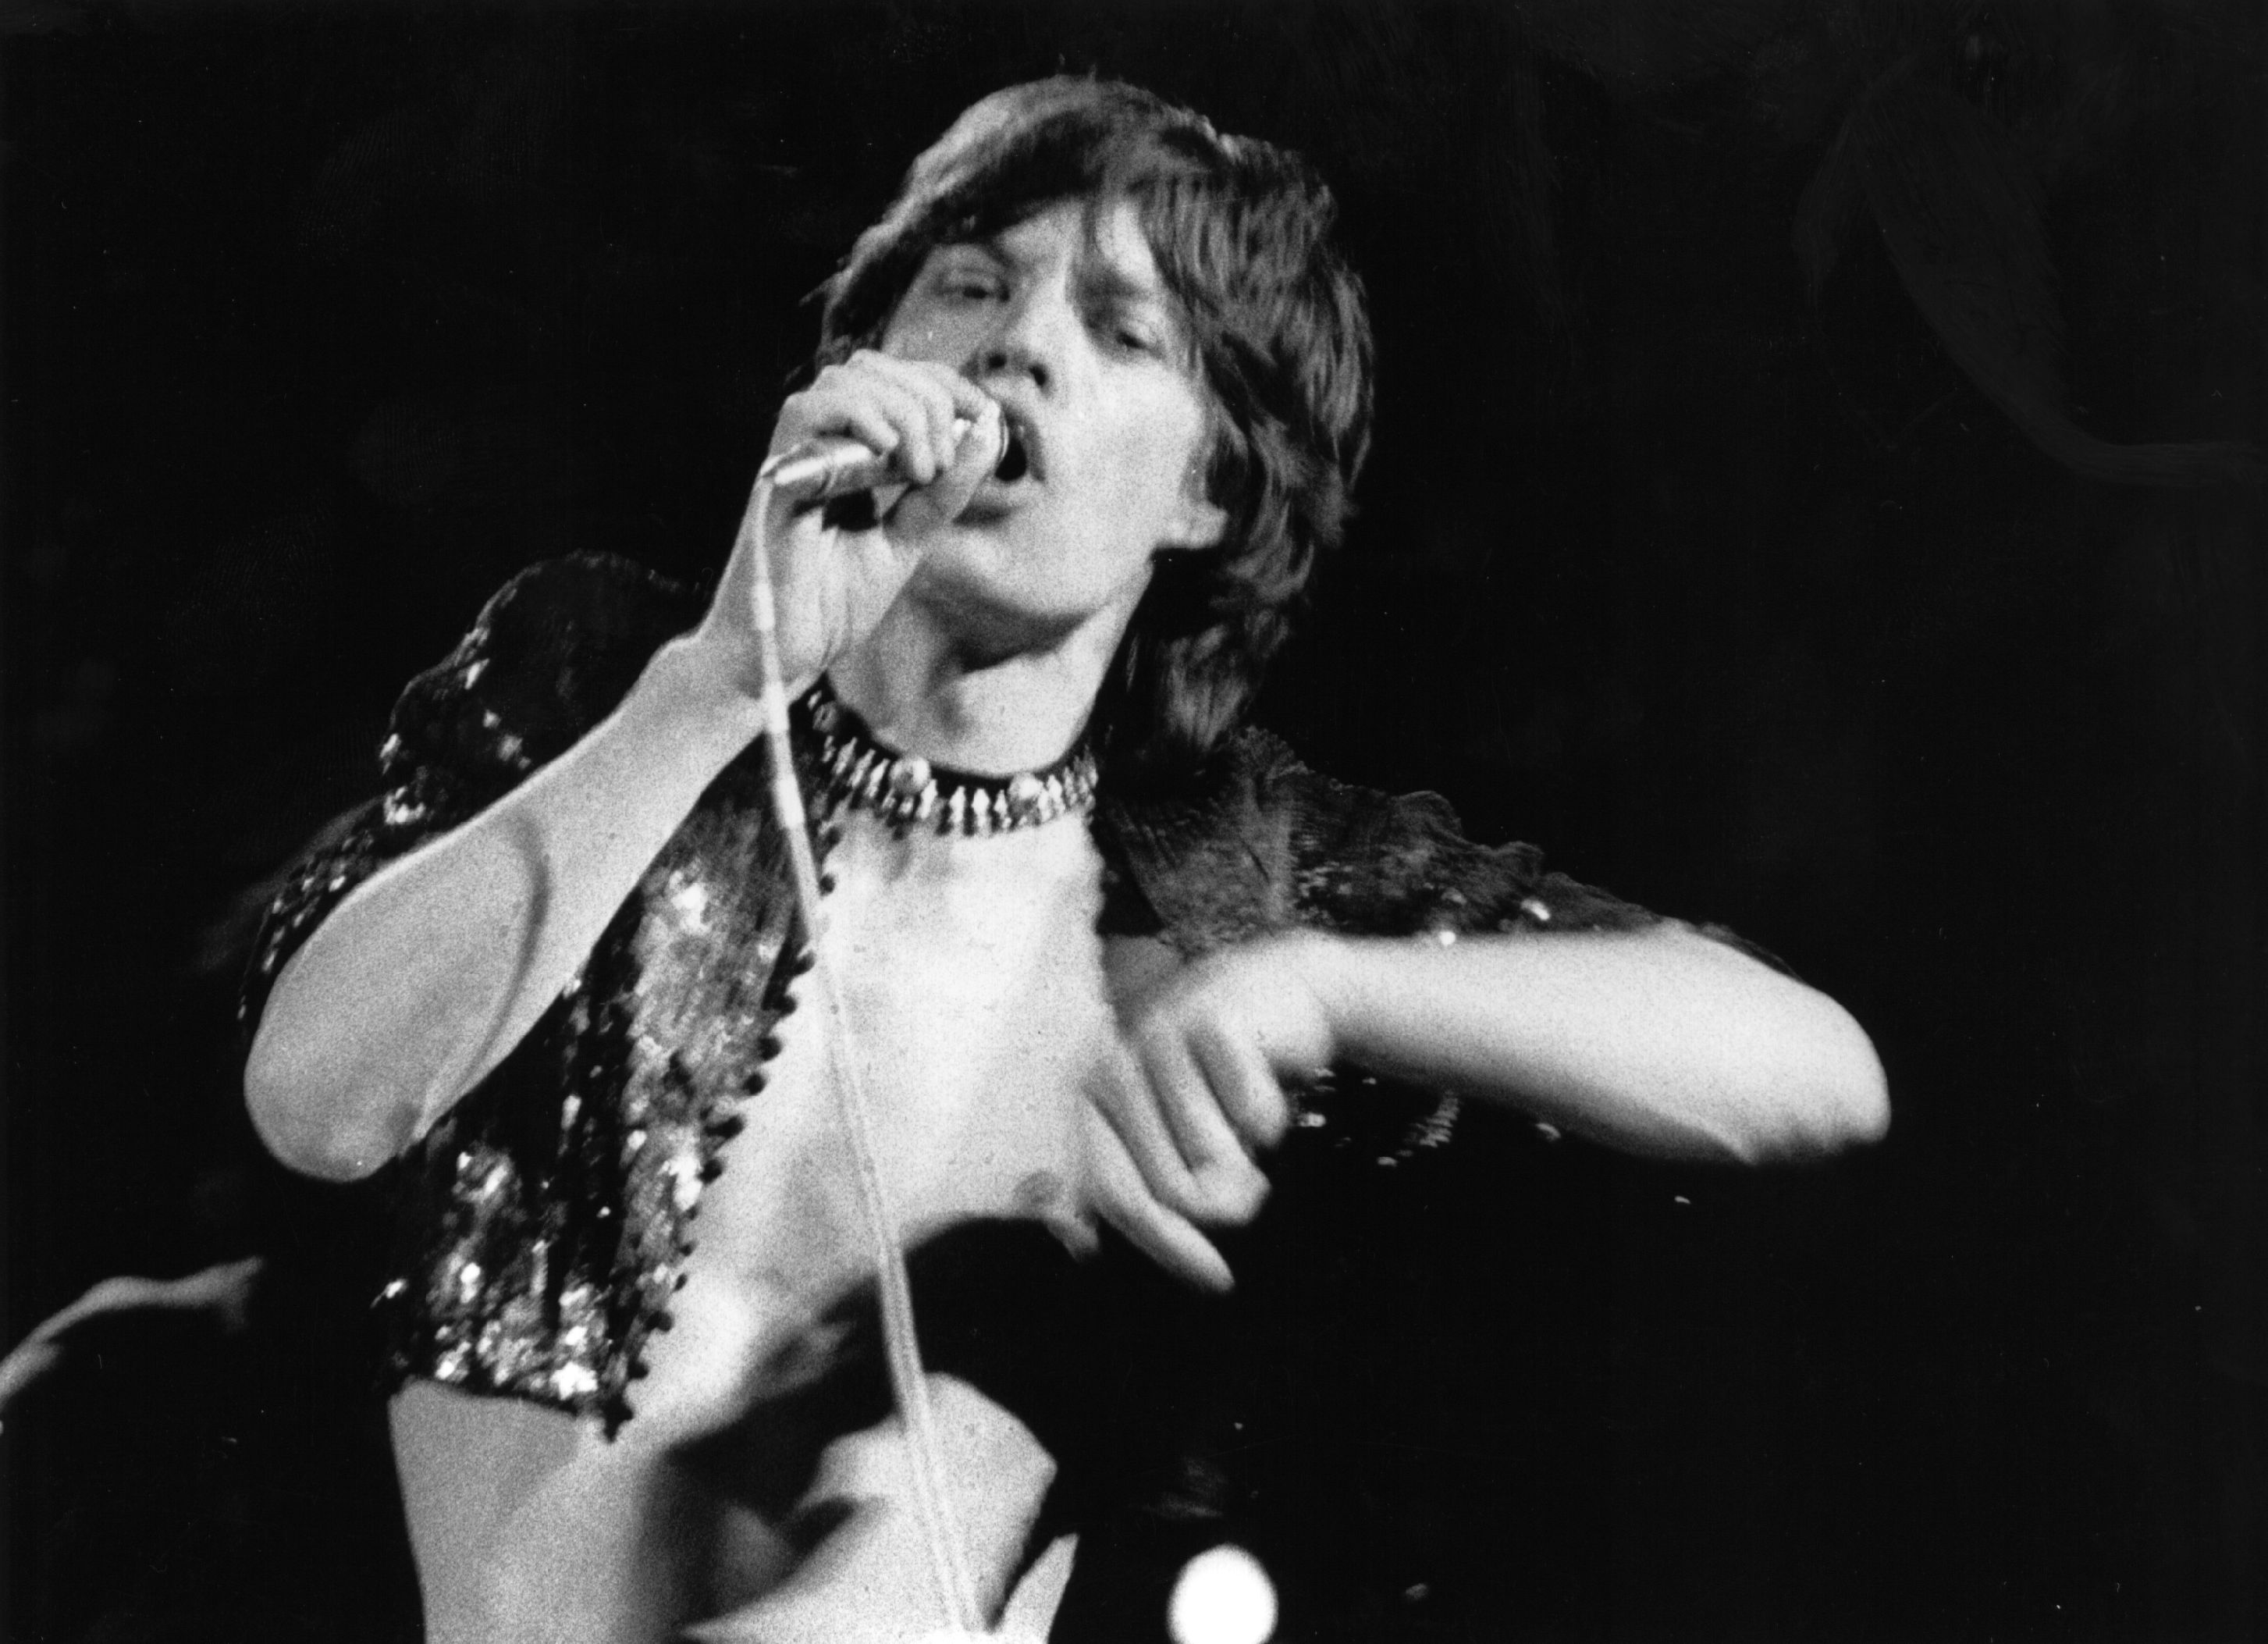 Mick Jagger of The Rolling Stones with a microphone